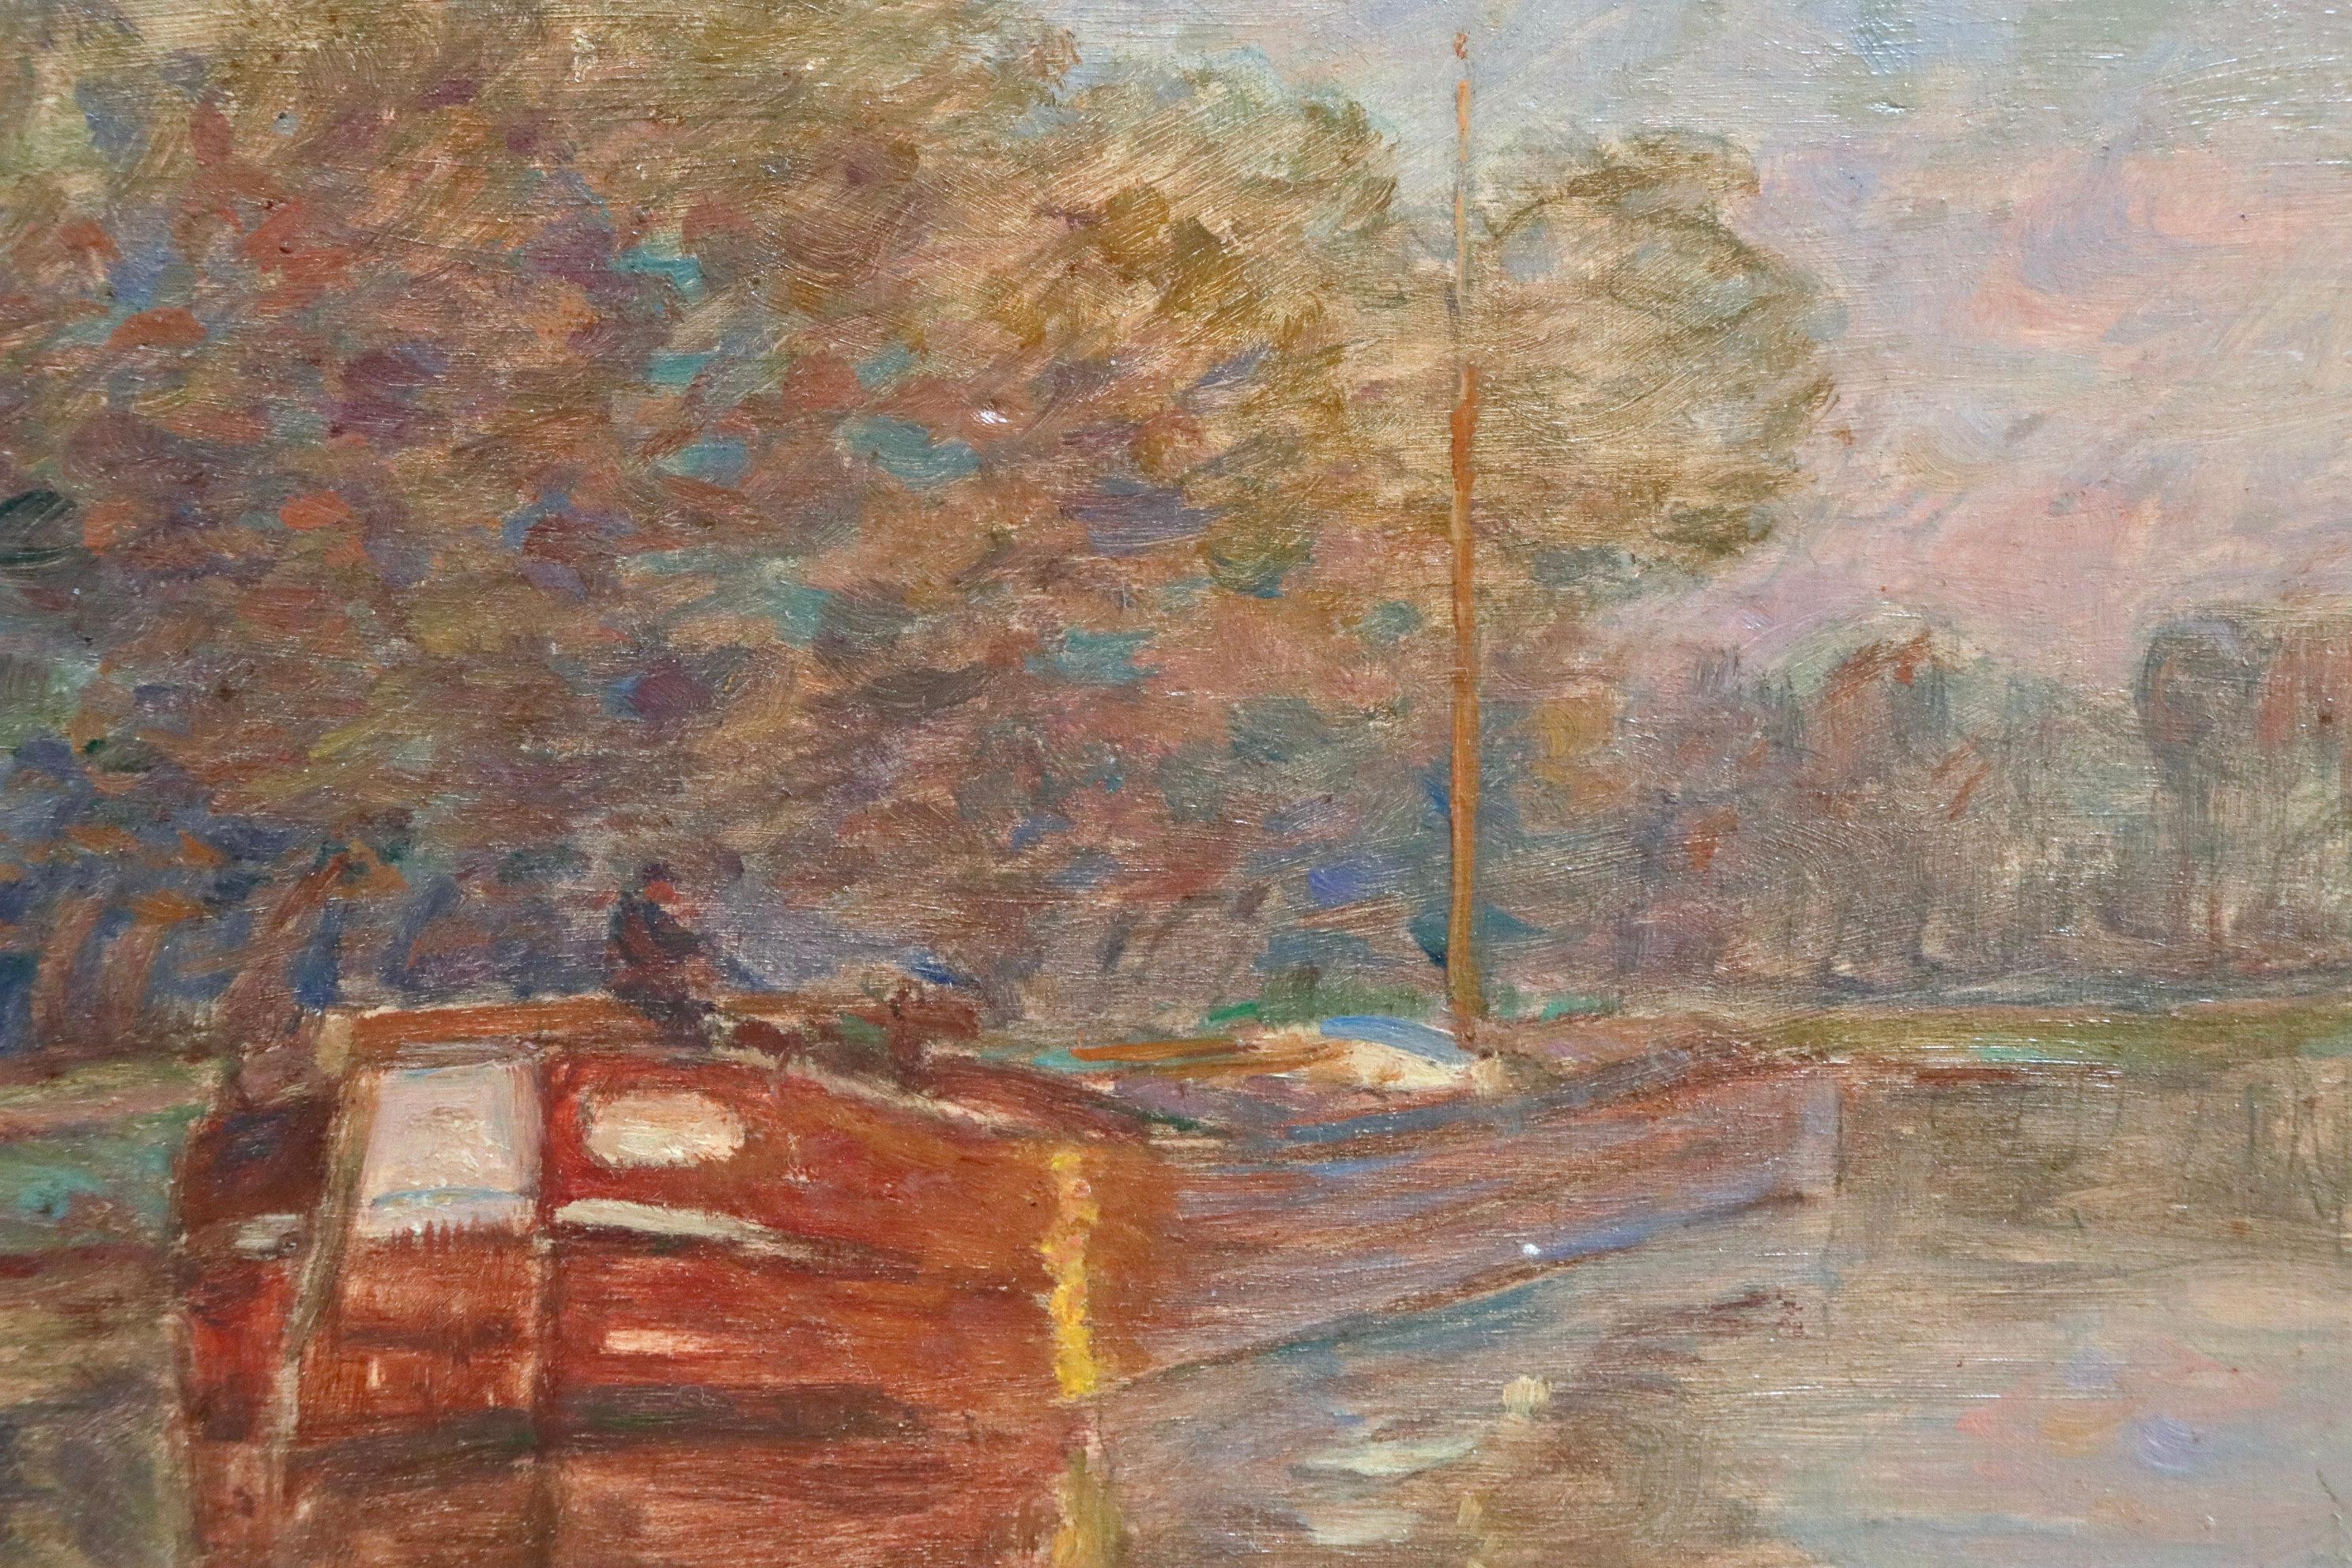 A wonderful oil on panel by Henri Duhem depicting a lone man on a barge sailing down the canal in Douai, one of Henri Duhem's favourite subjects. Signed lower left and dated 1908 verso. This painting is not currently framed but a suitable frame can